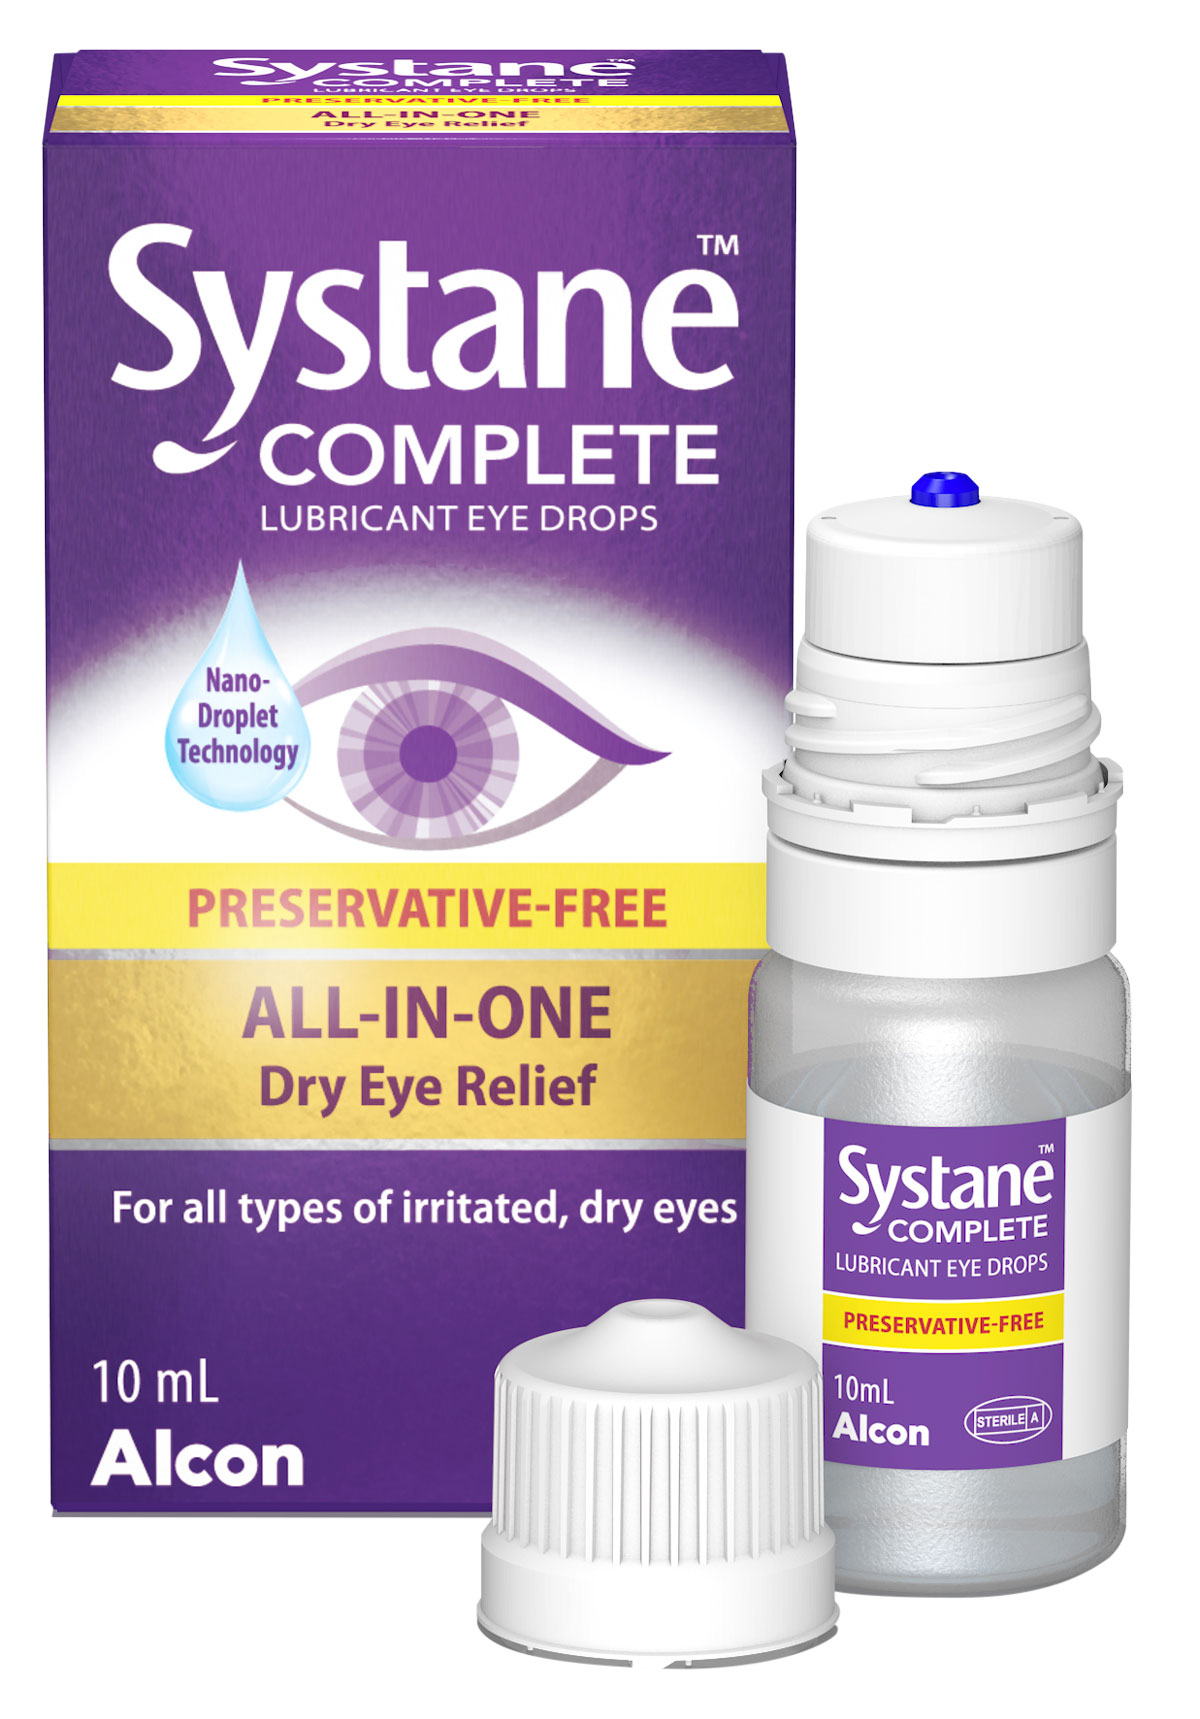 Systane Complete PF eye drops.